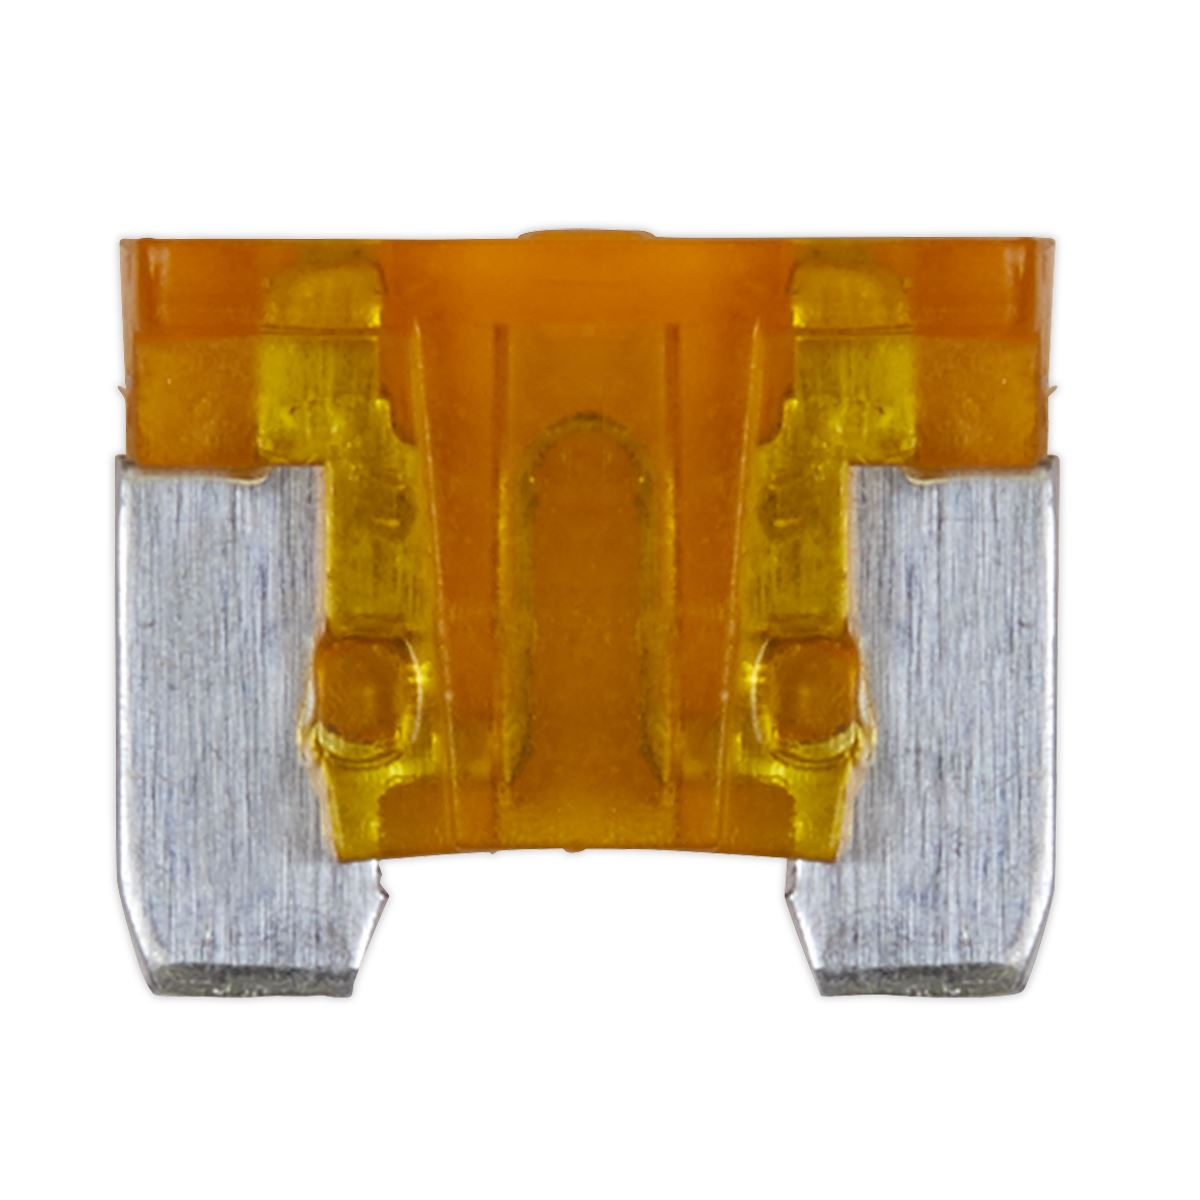 Sealey Automotive MICRO Blade Fuse 5A - Pack of 50